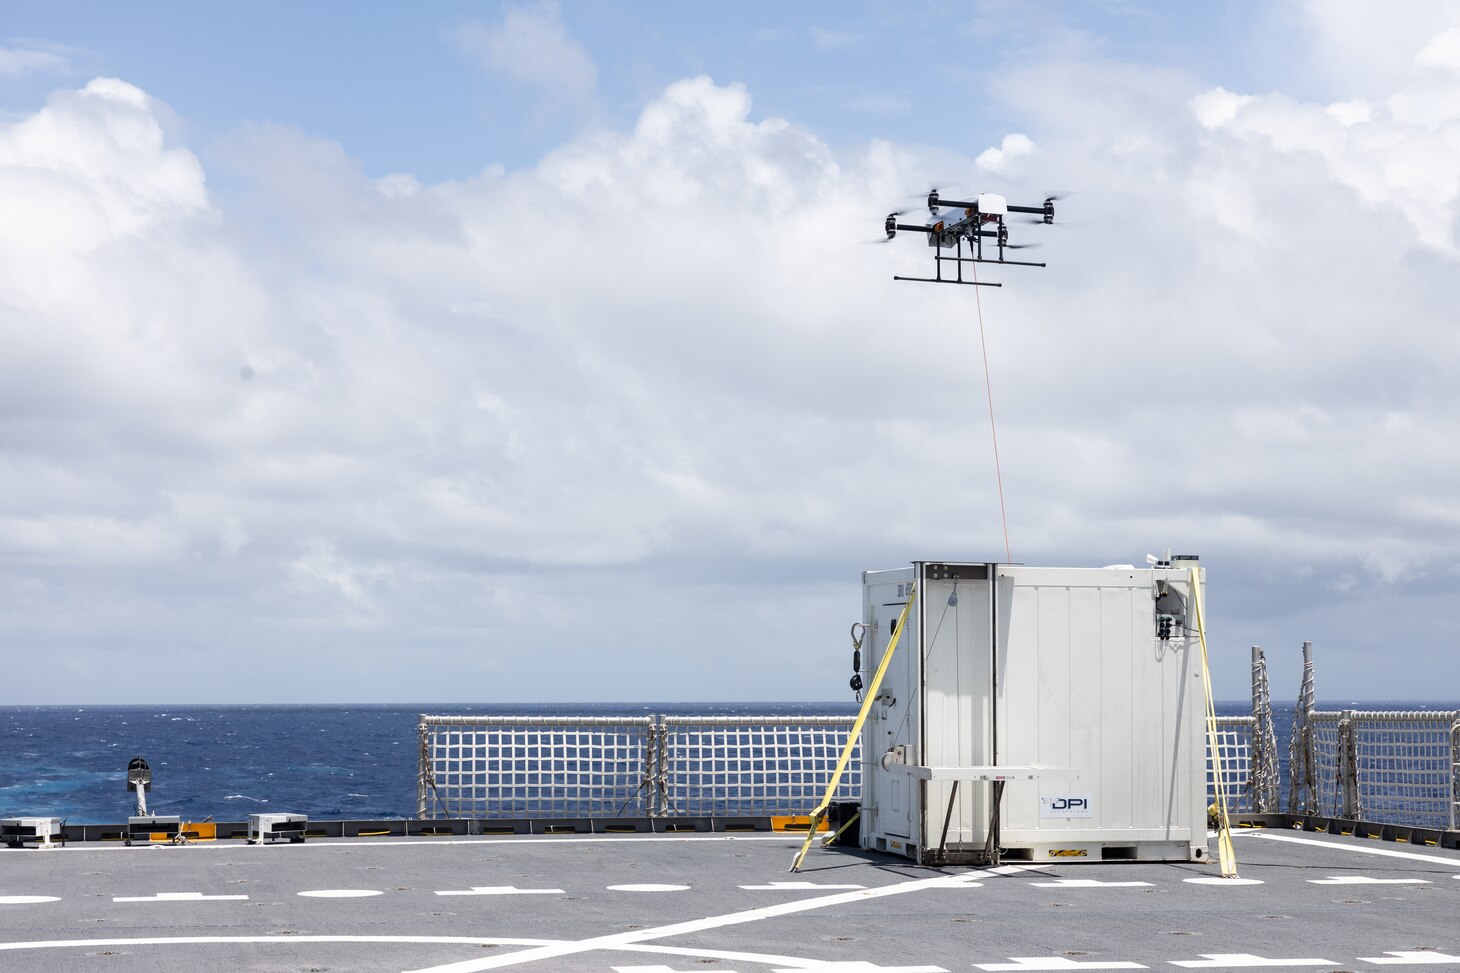 A tethered drone lands aboard the expeditionary fast transport vessel USNS Burlington (T-EPF-10) during a fleet experimentation period with scientists working with the Office of Naval Research and U.S. Naval Forces Southern Command/U.S. 4th Fleet. The fleet experimentation serves to demonstrate Navy/Marine Corps integration by testing concepts that would be employed during expeditionary advance base operations, evaluating expeditionary systems for force protection and coordinated electronic warfare.